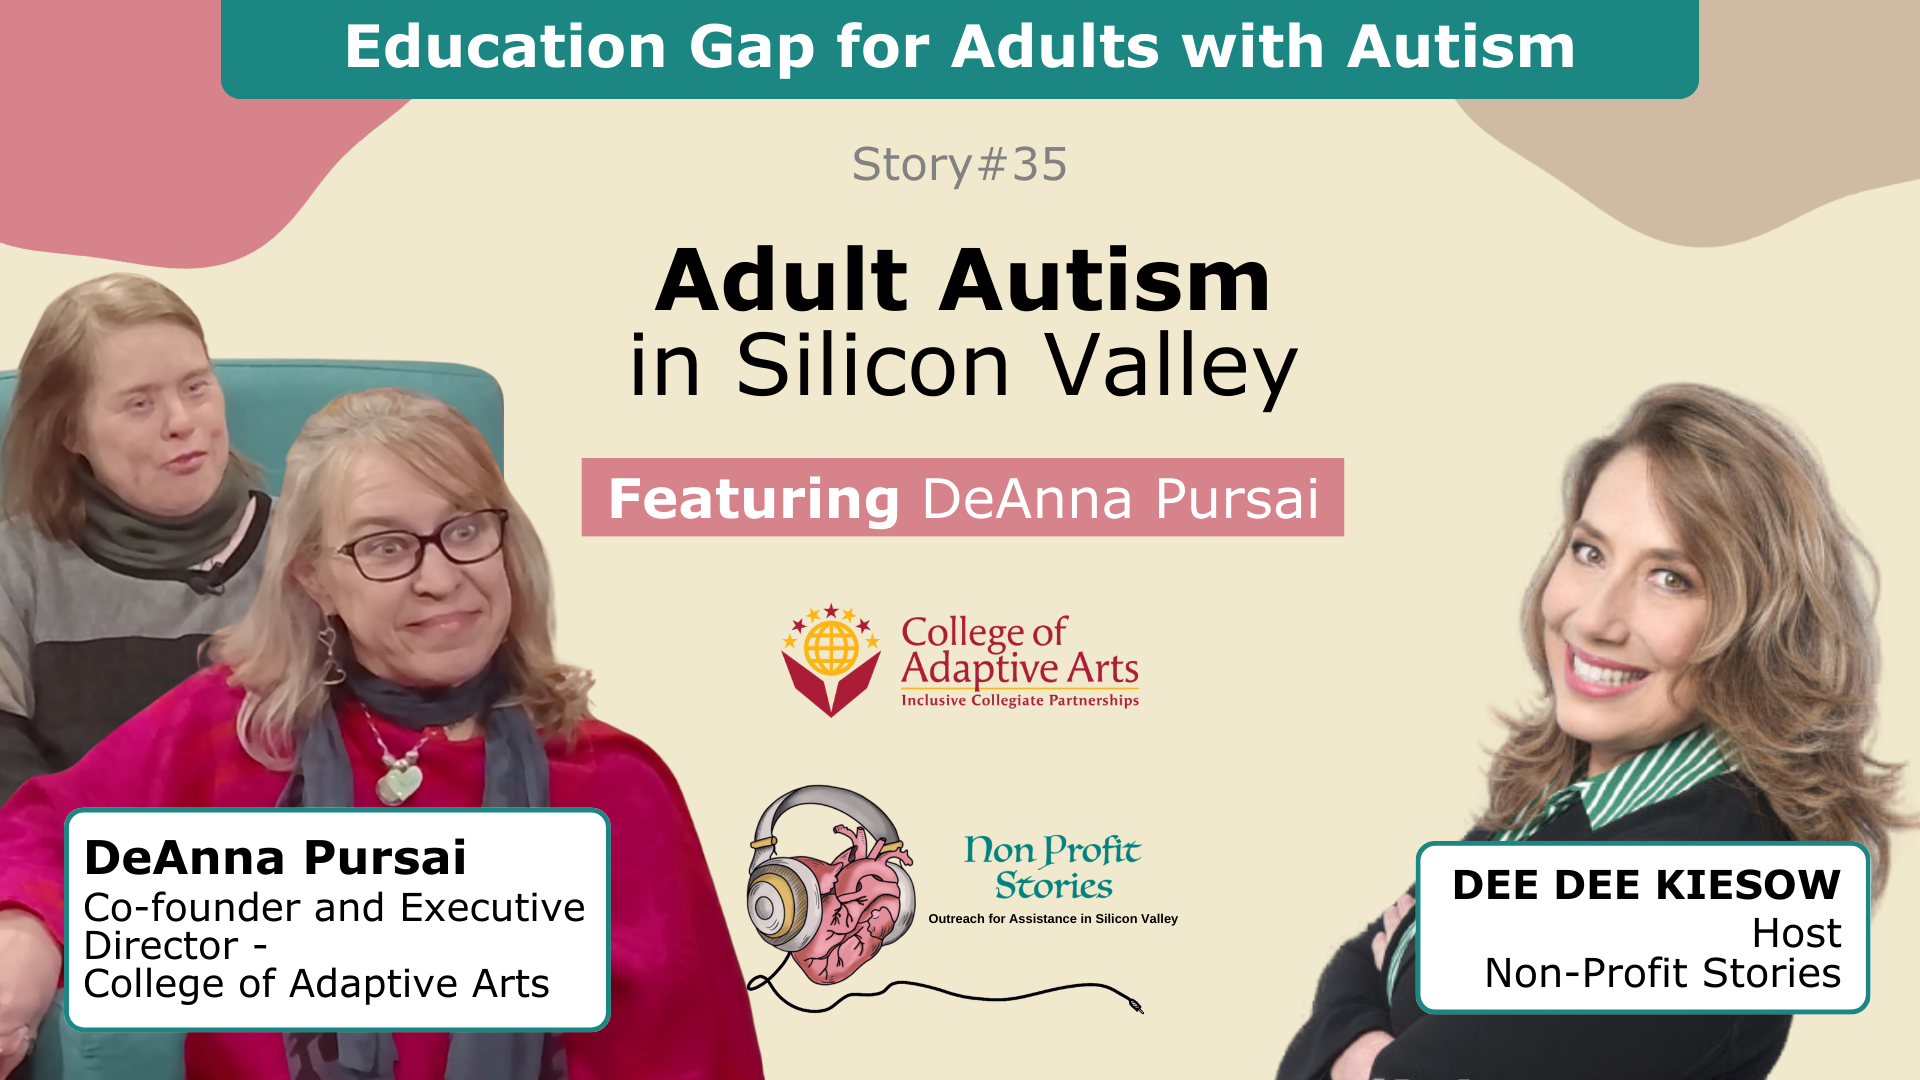 Adult Autism: Education Gap for Adults with Autism in Silicon Valley